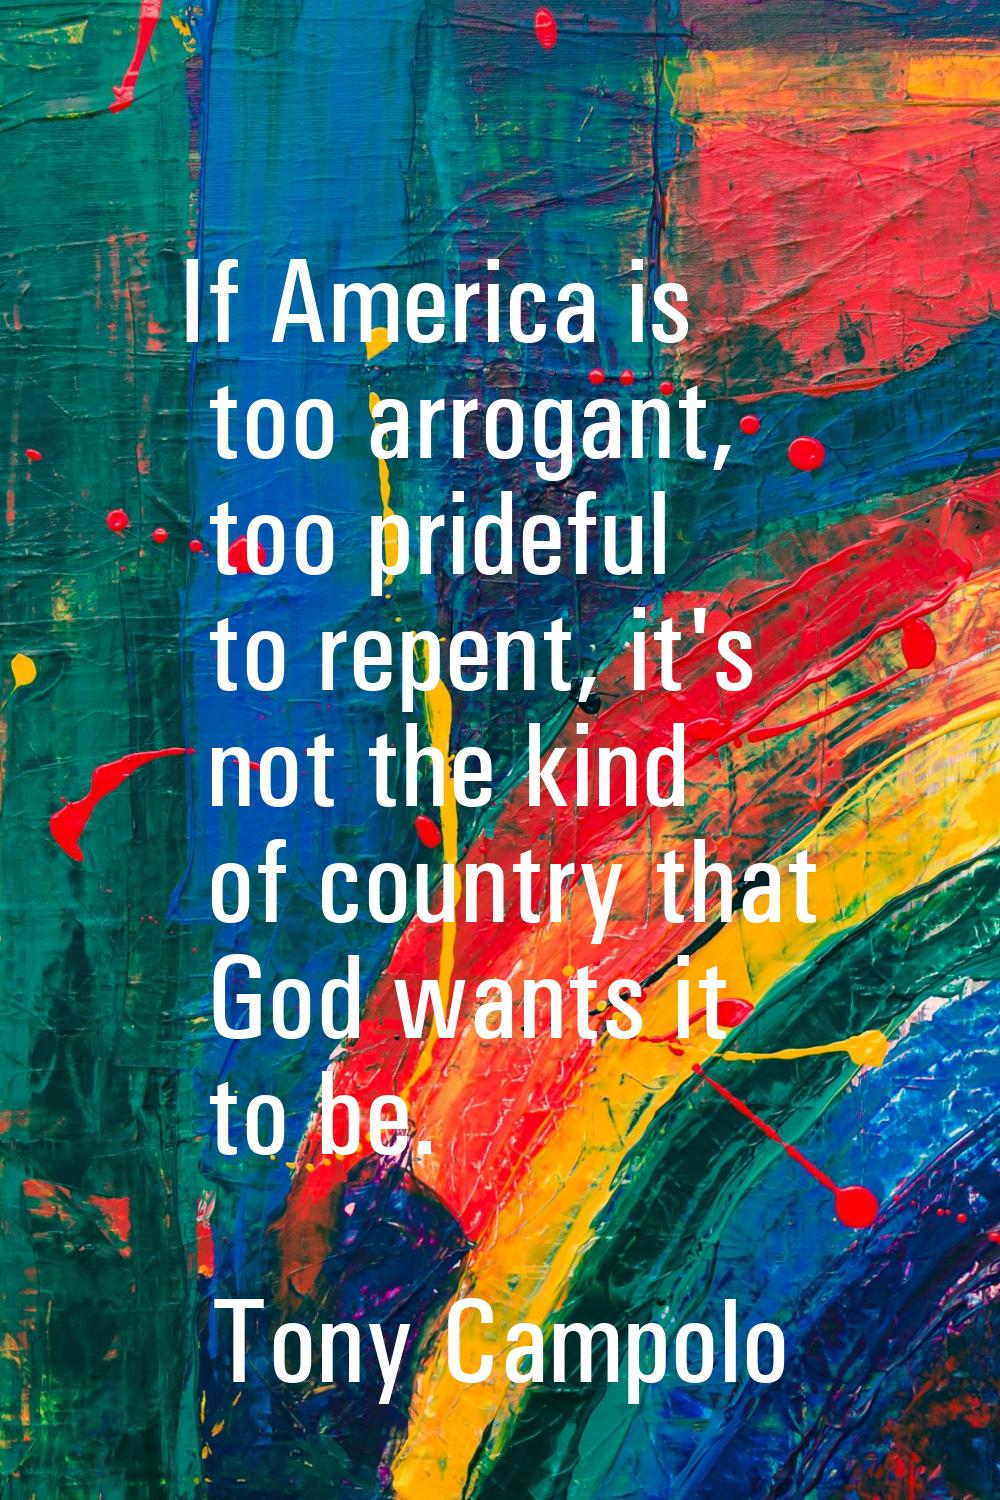 If America is too arrogant, too prideful to repent, it's not the kind of country that God wants it 